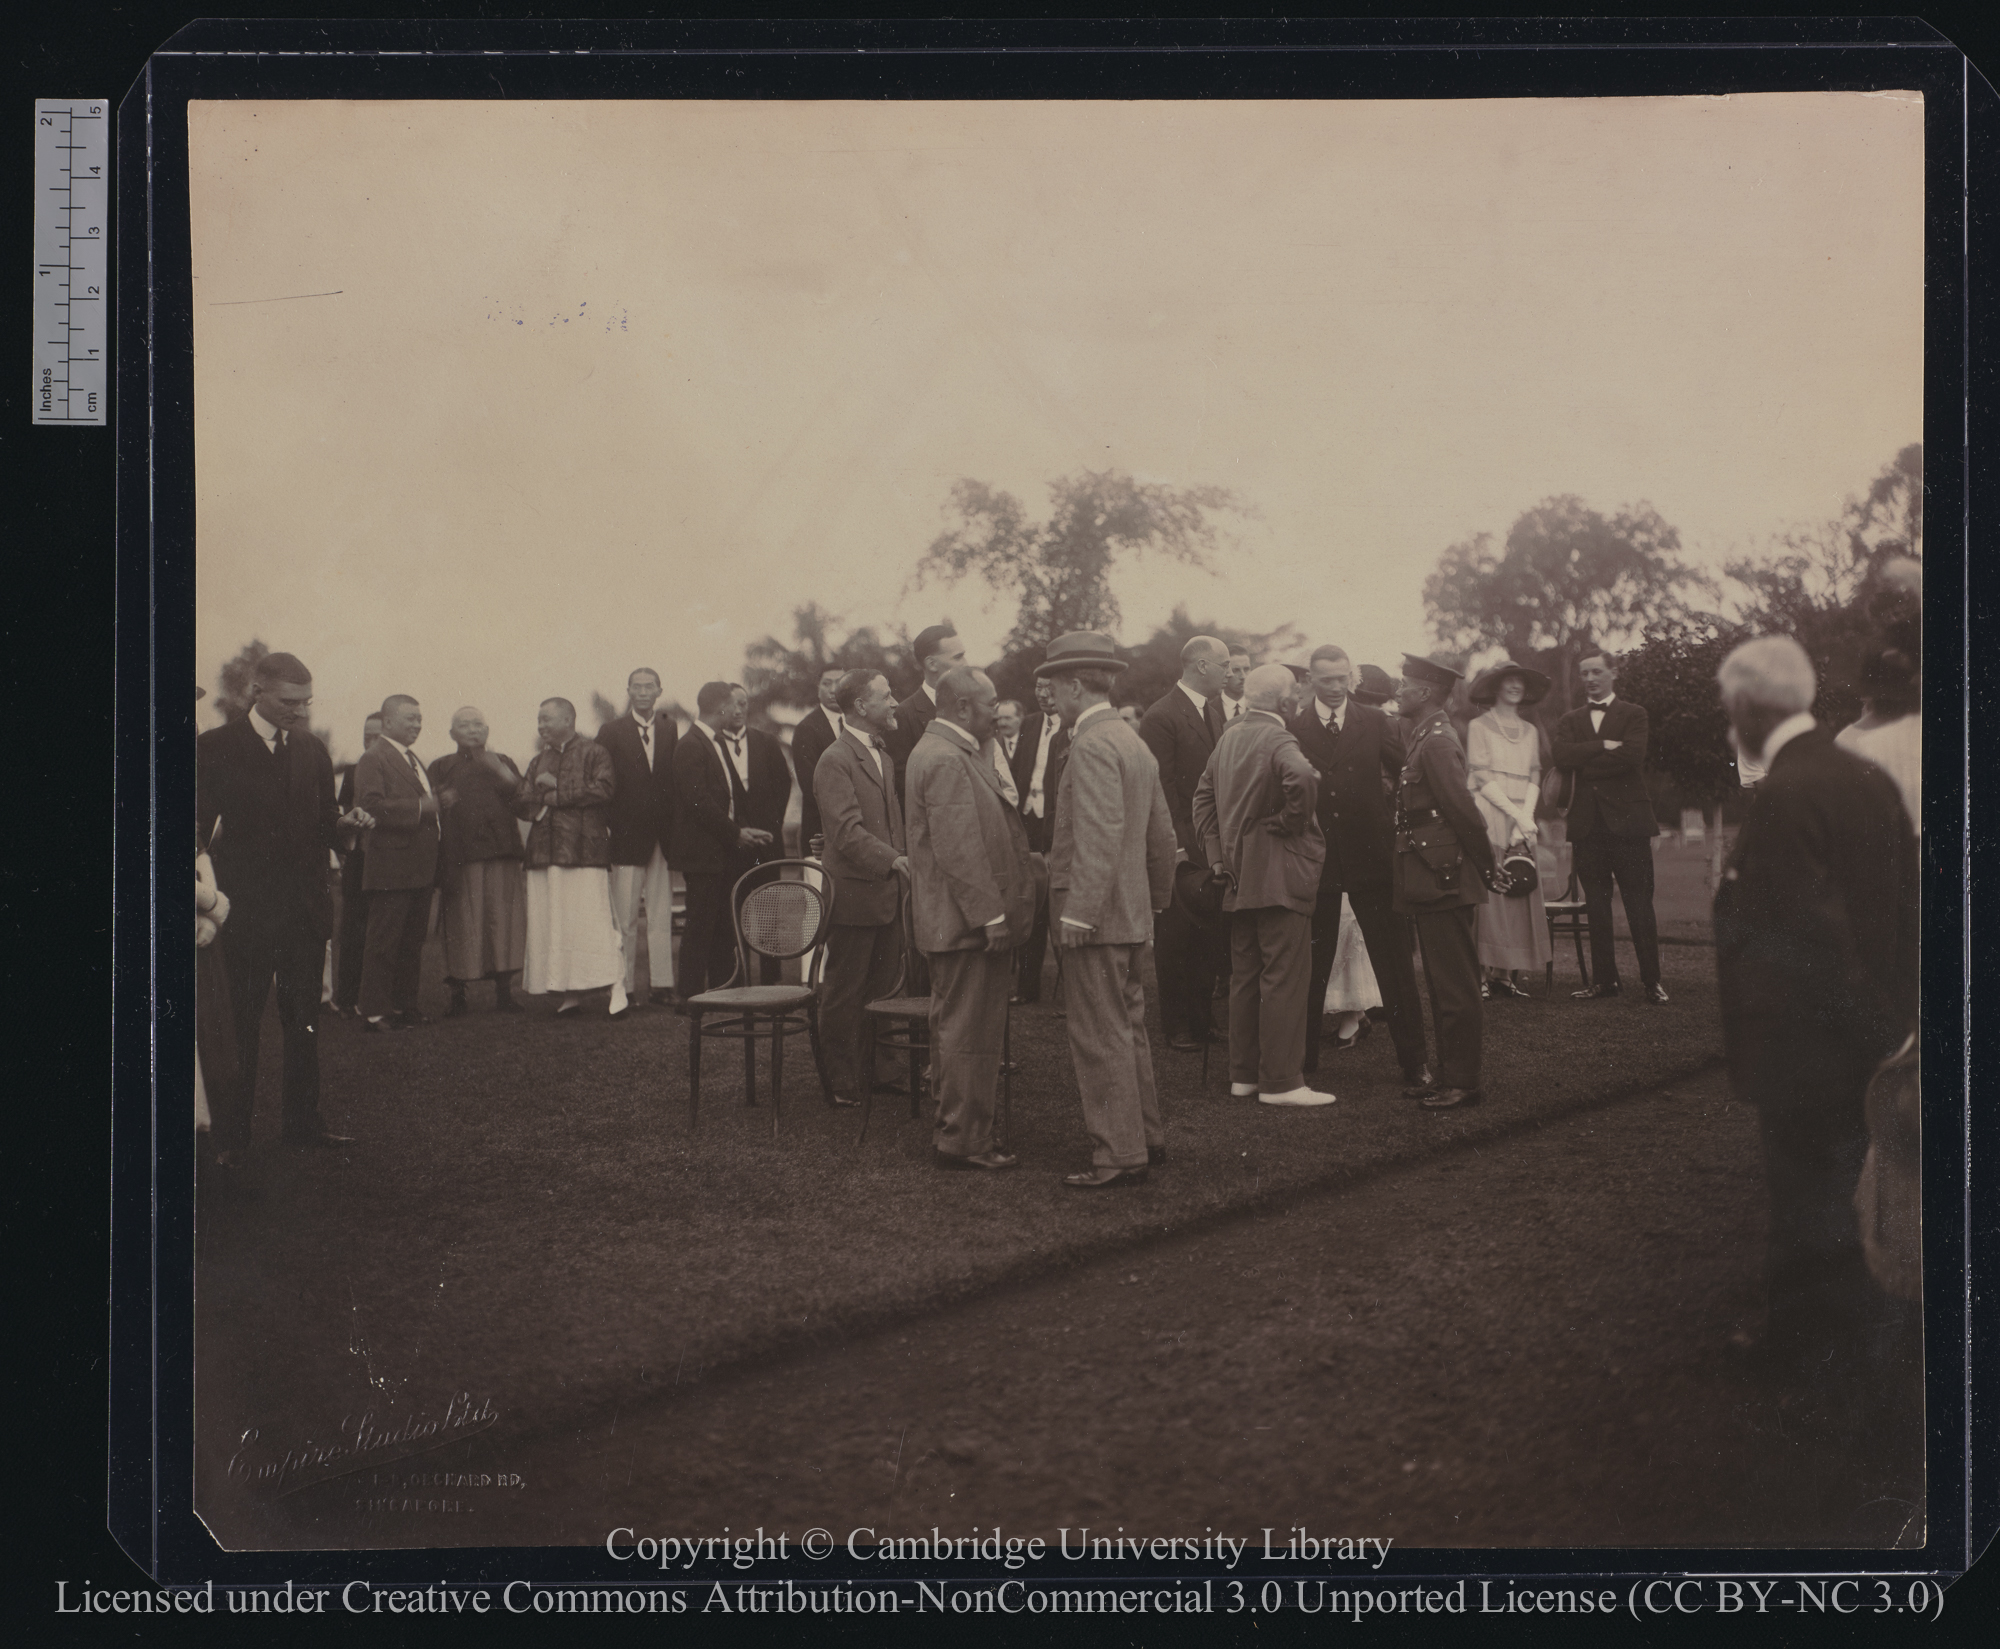 M.G. Clemenceau, Government House Party, Singapore, 21 October 1920, 1920-10-21